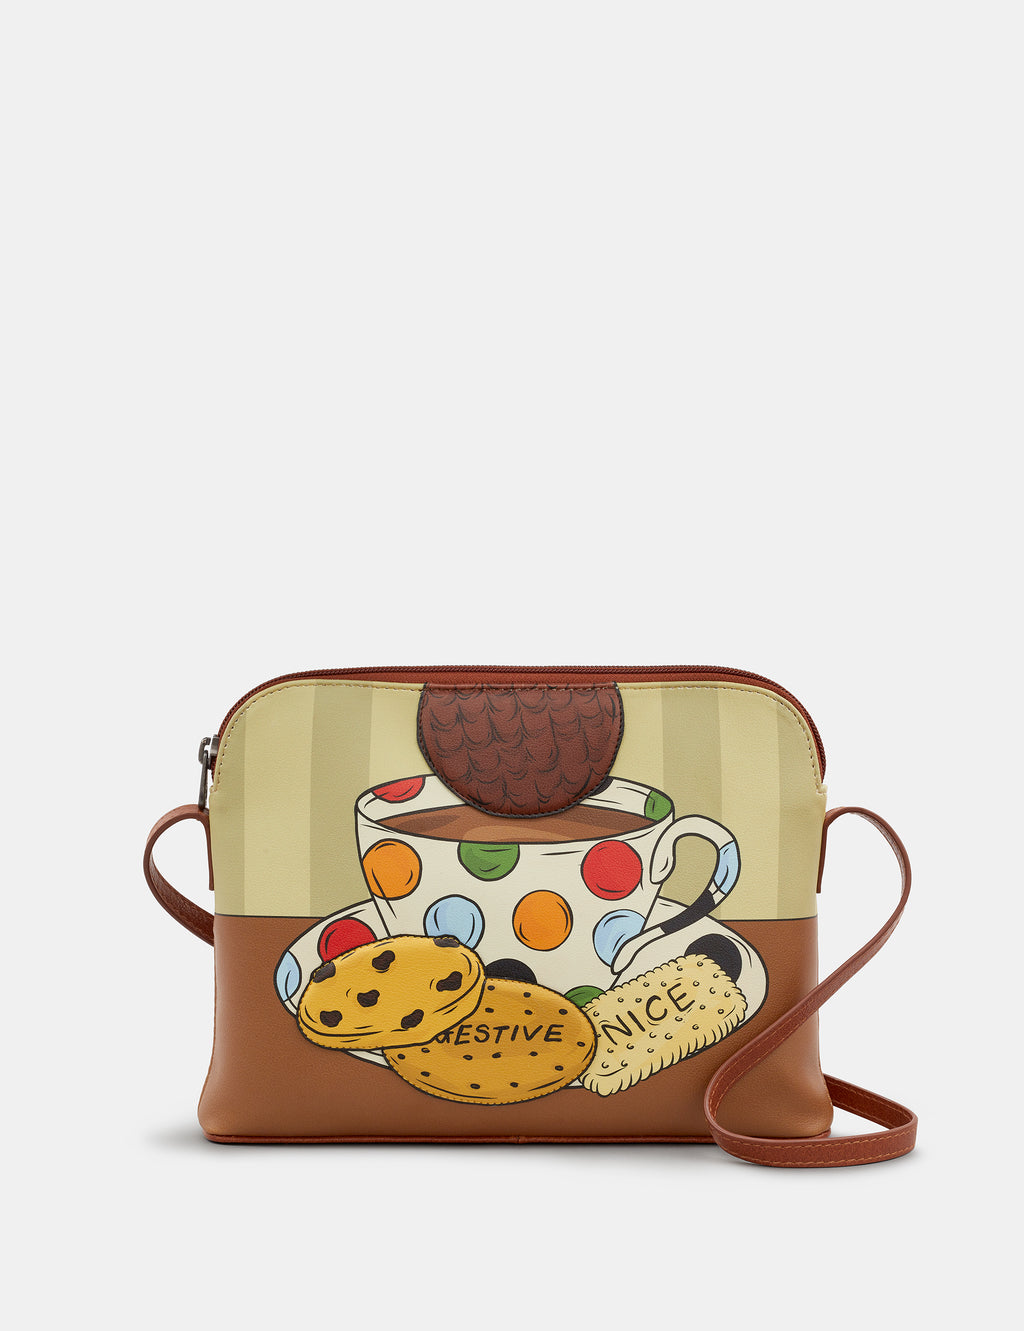 Tea and Biscuits Leather Cross Body Bag